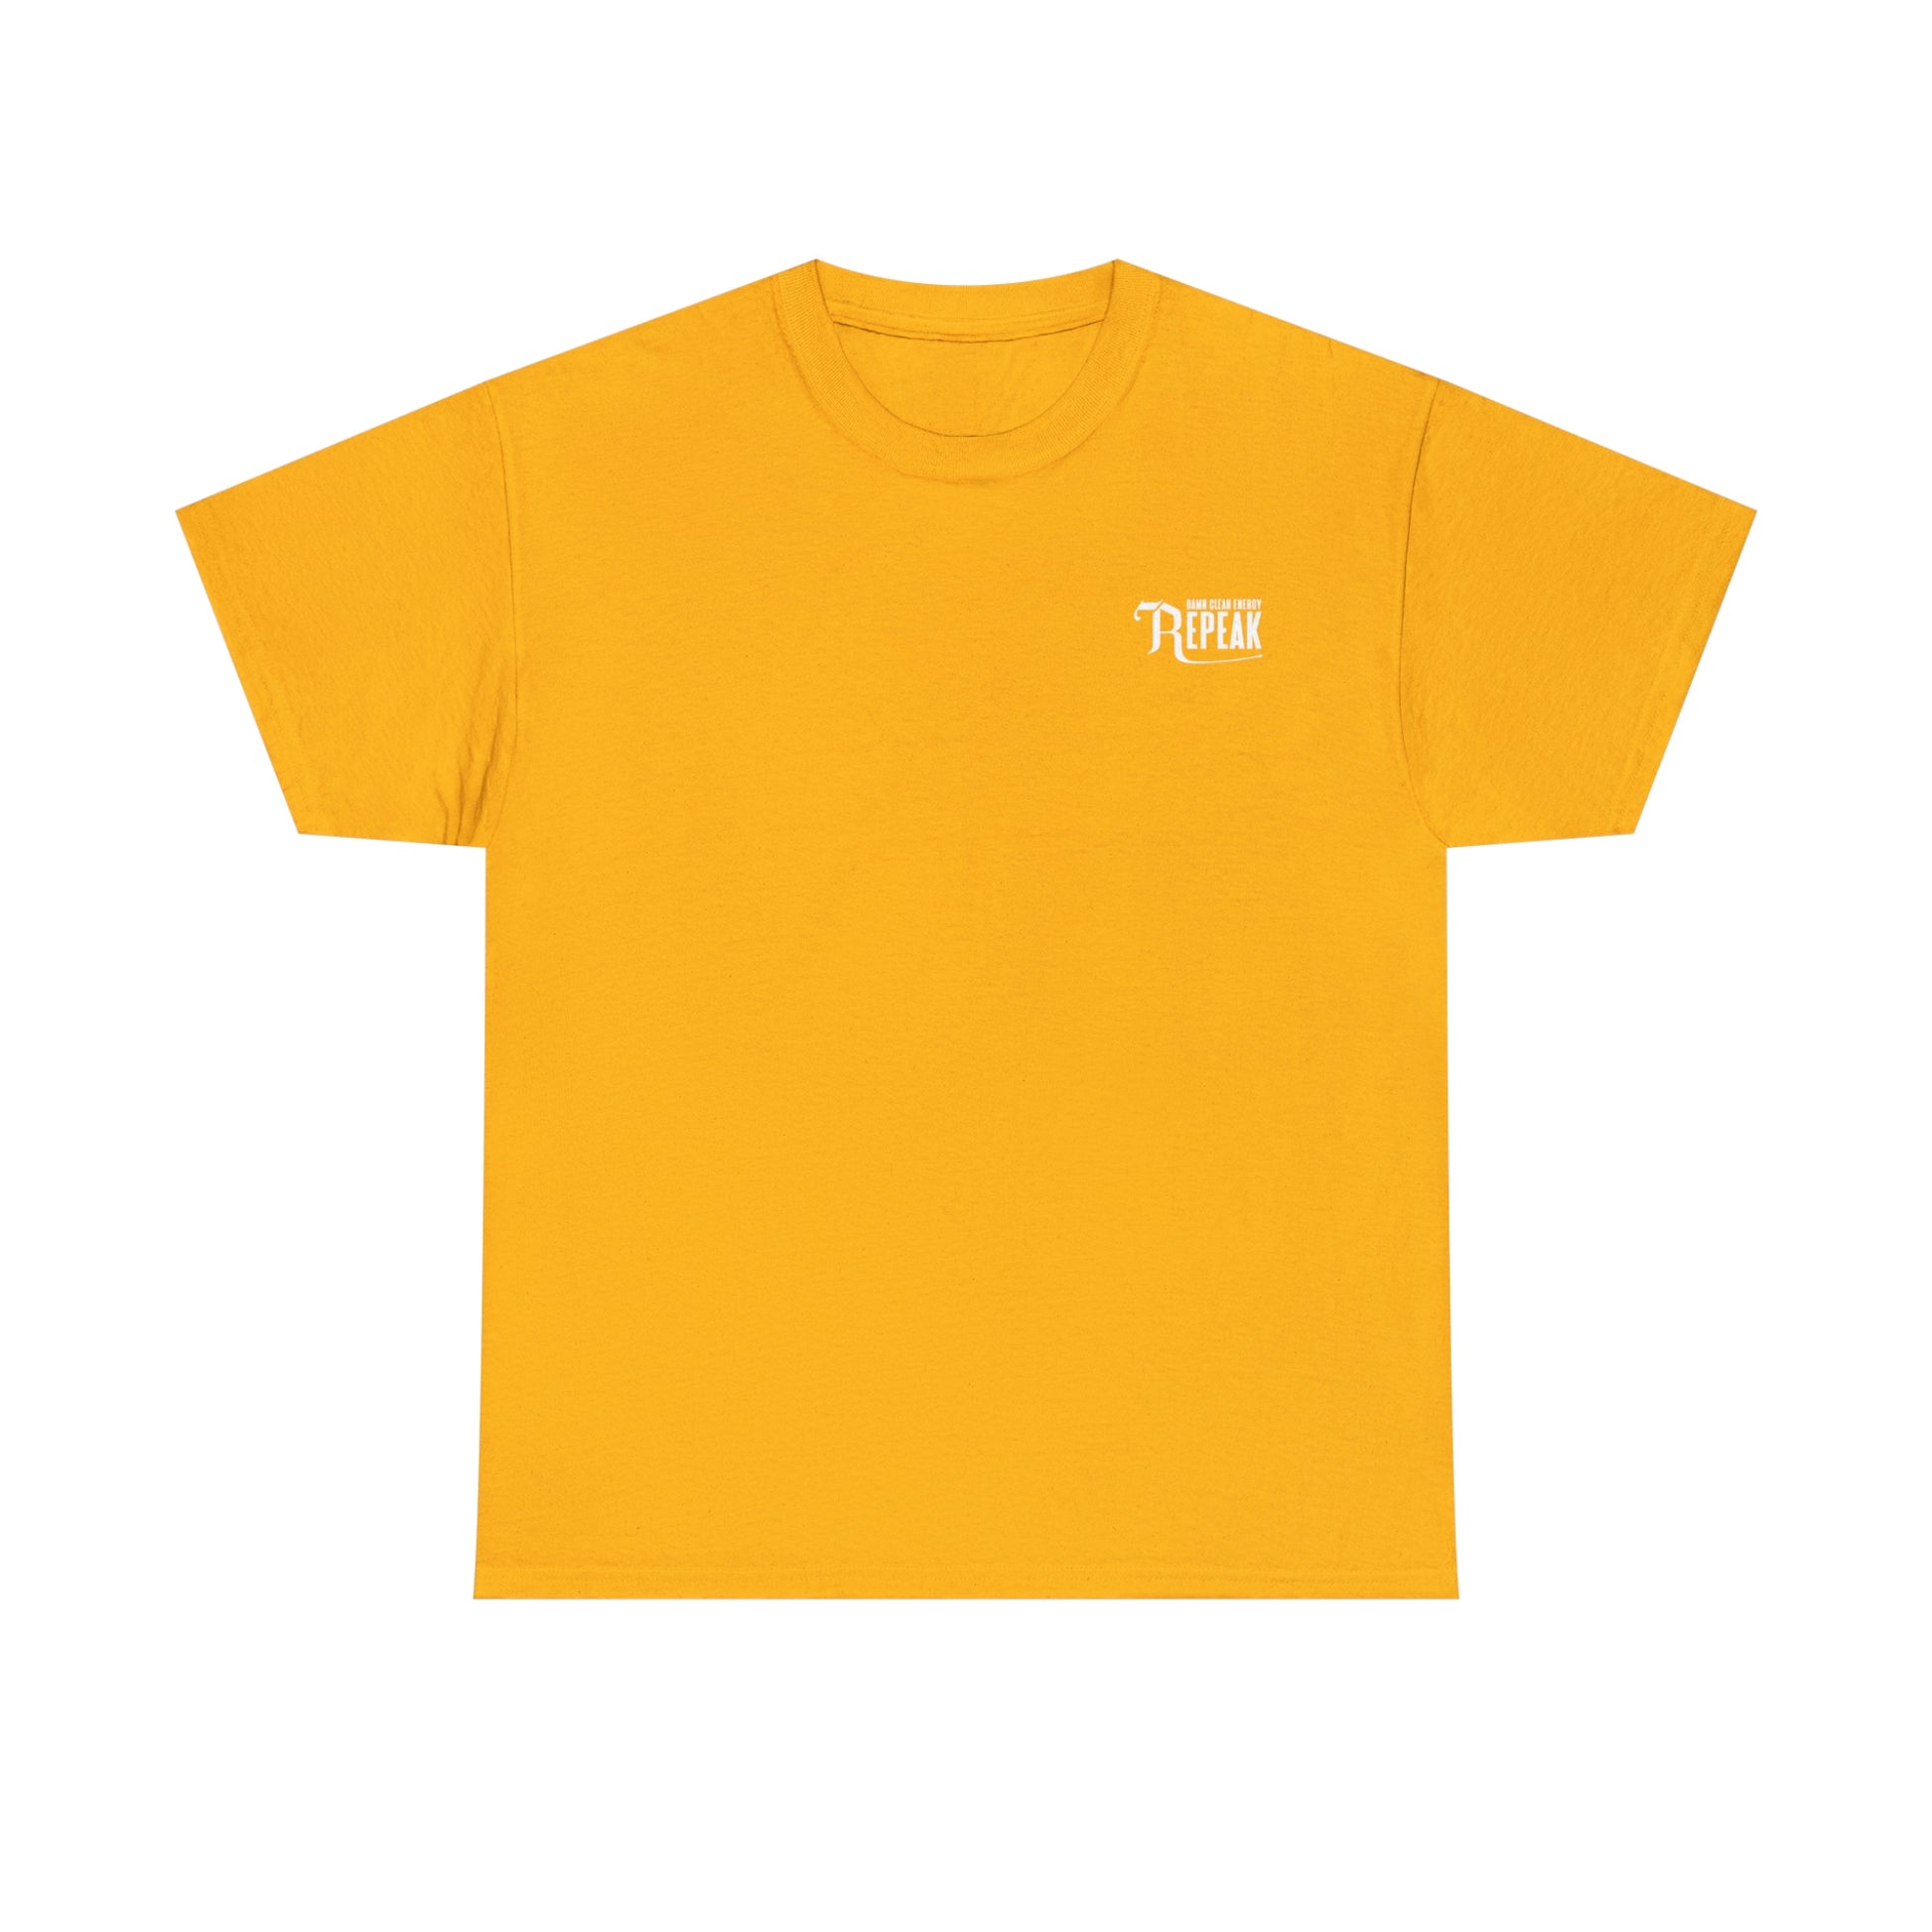 repeak energy drink gold t-shirt, front side